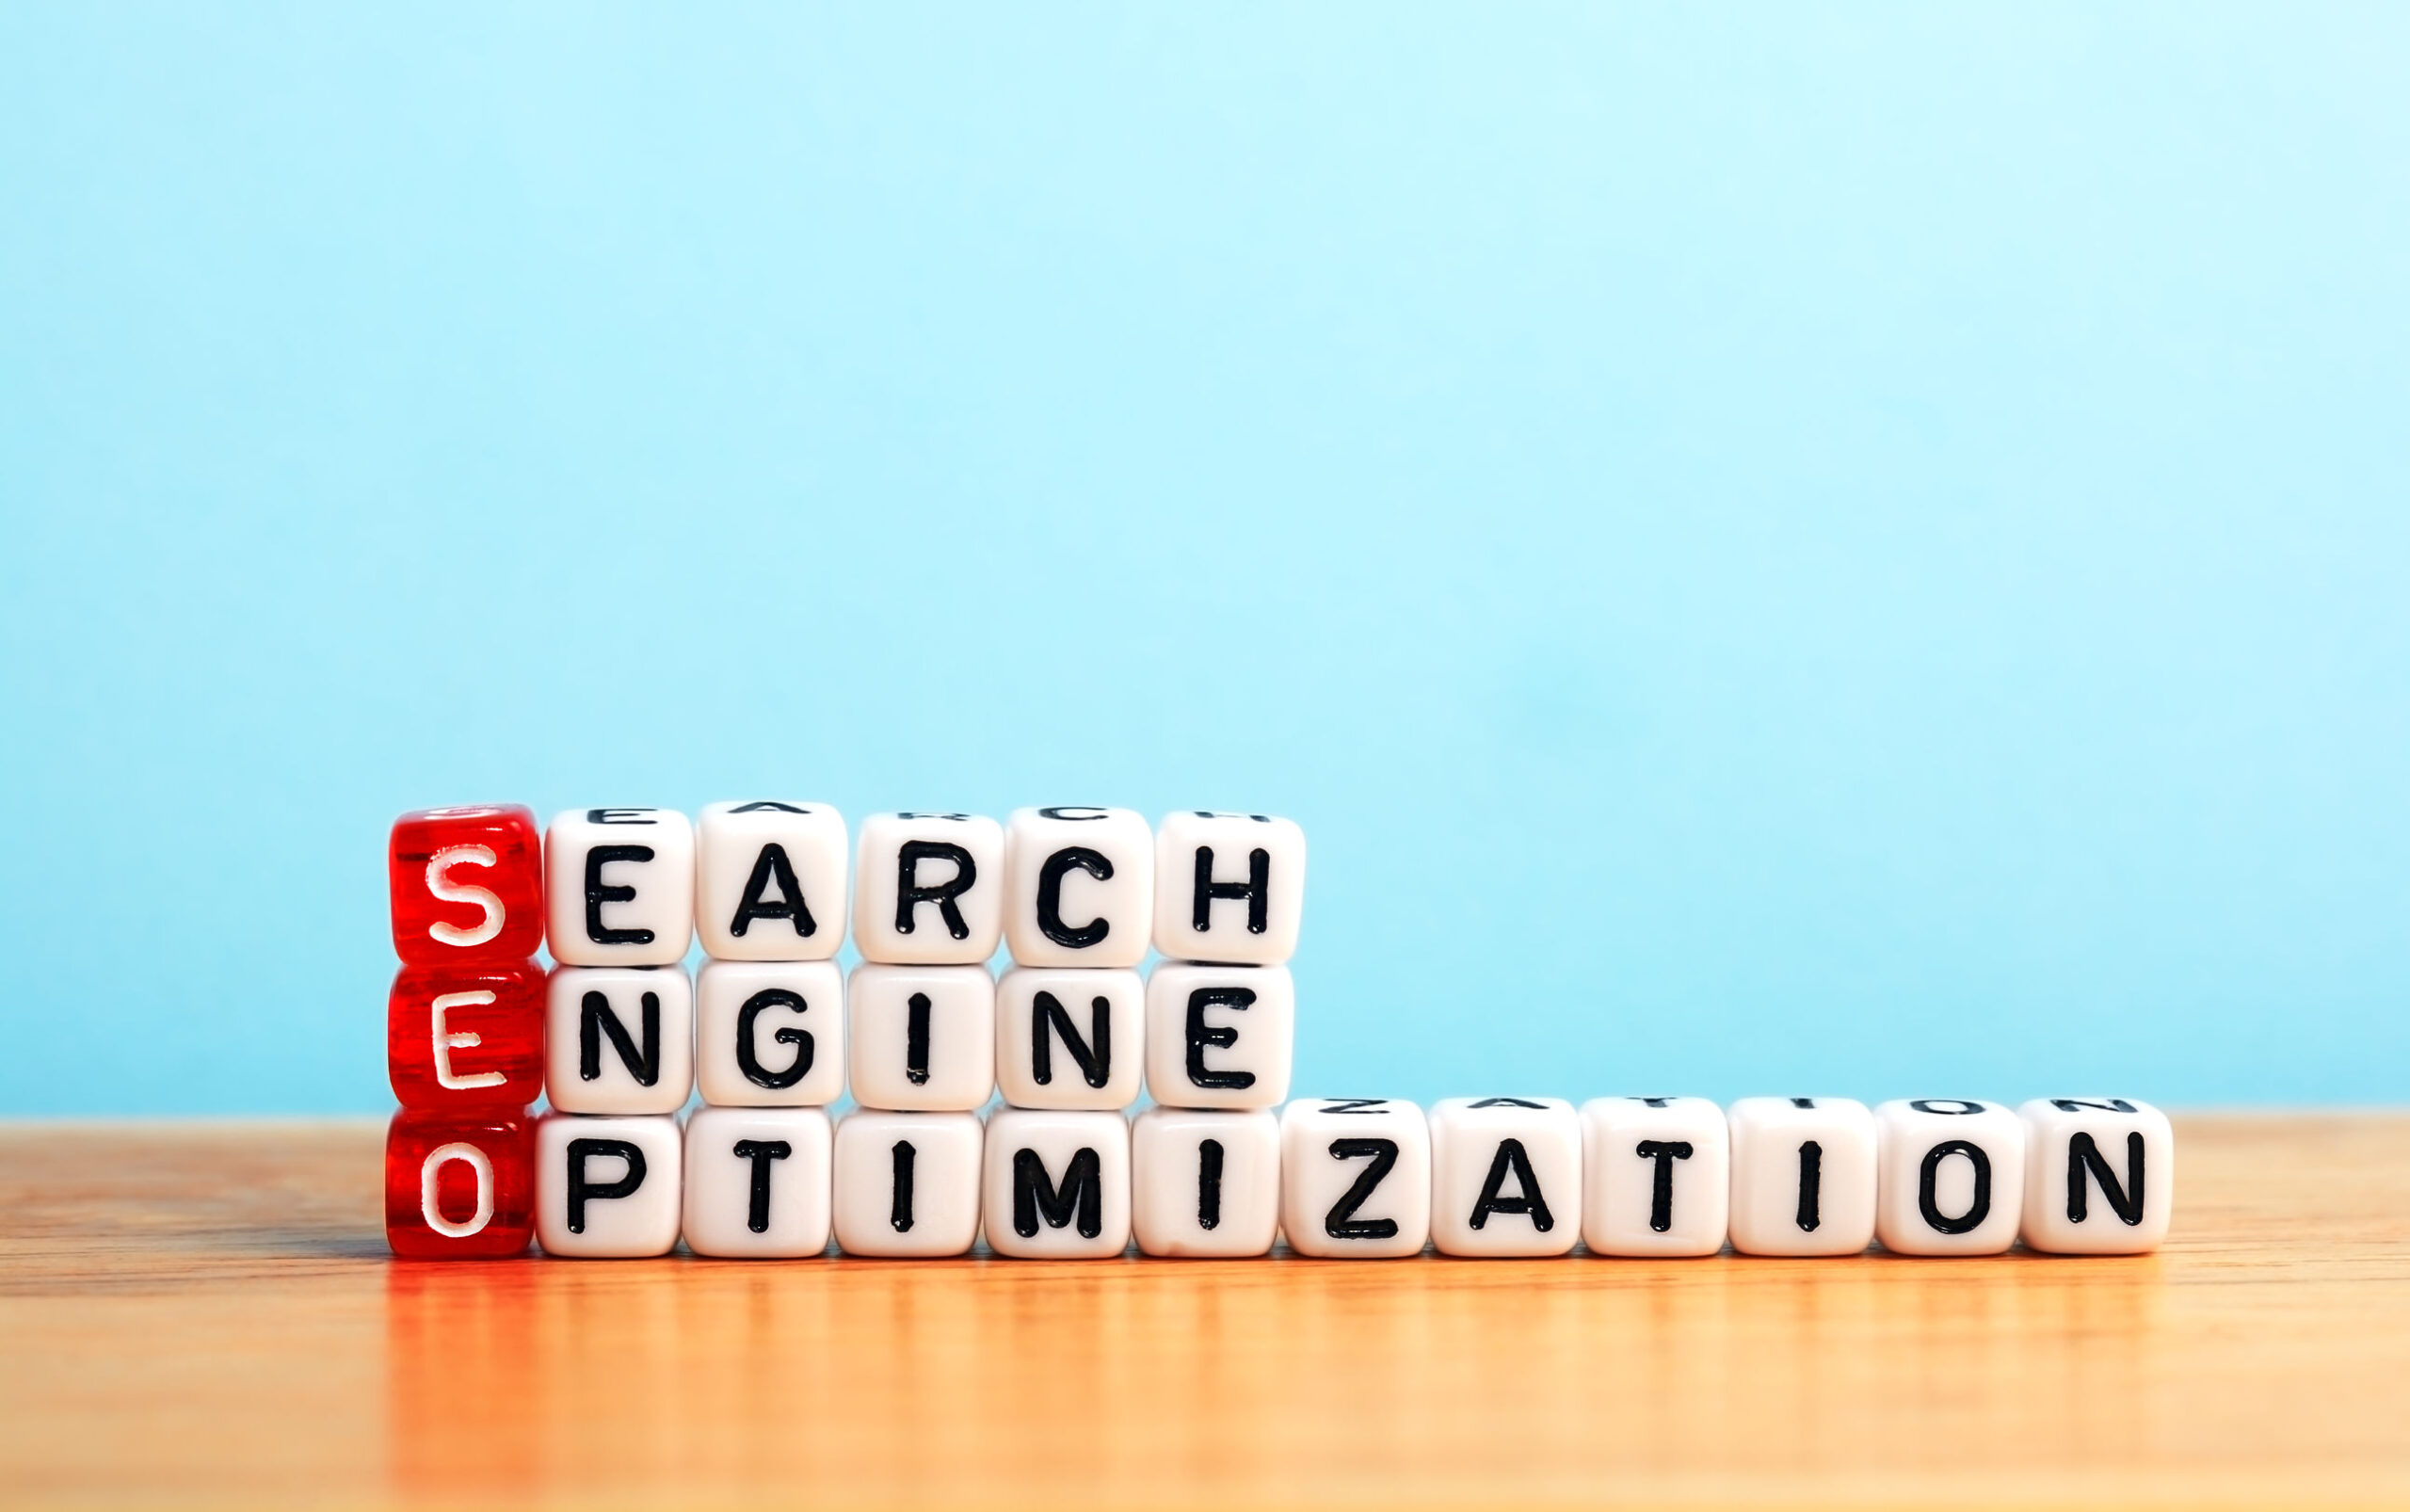 seo search engine optimization written on dices on blue background